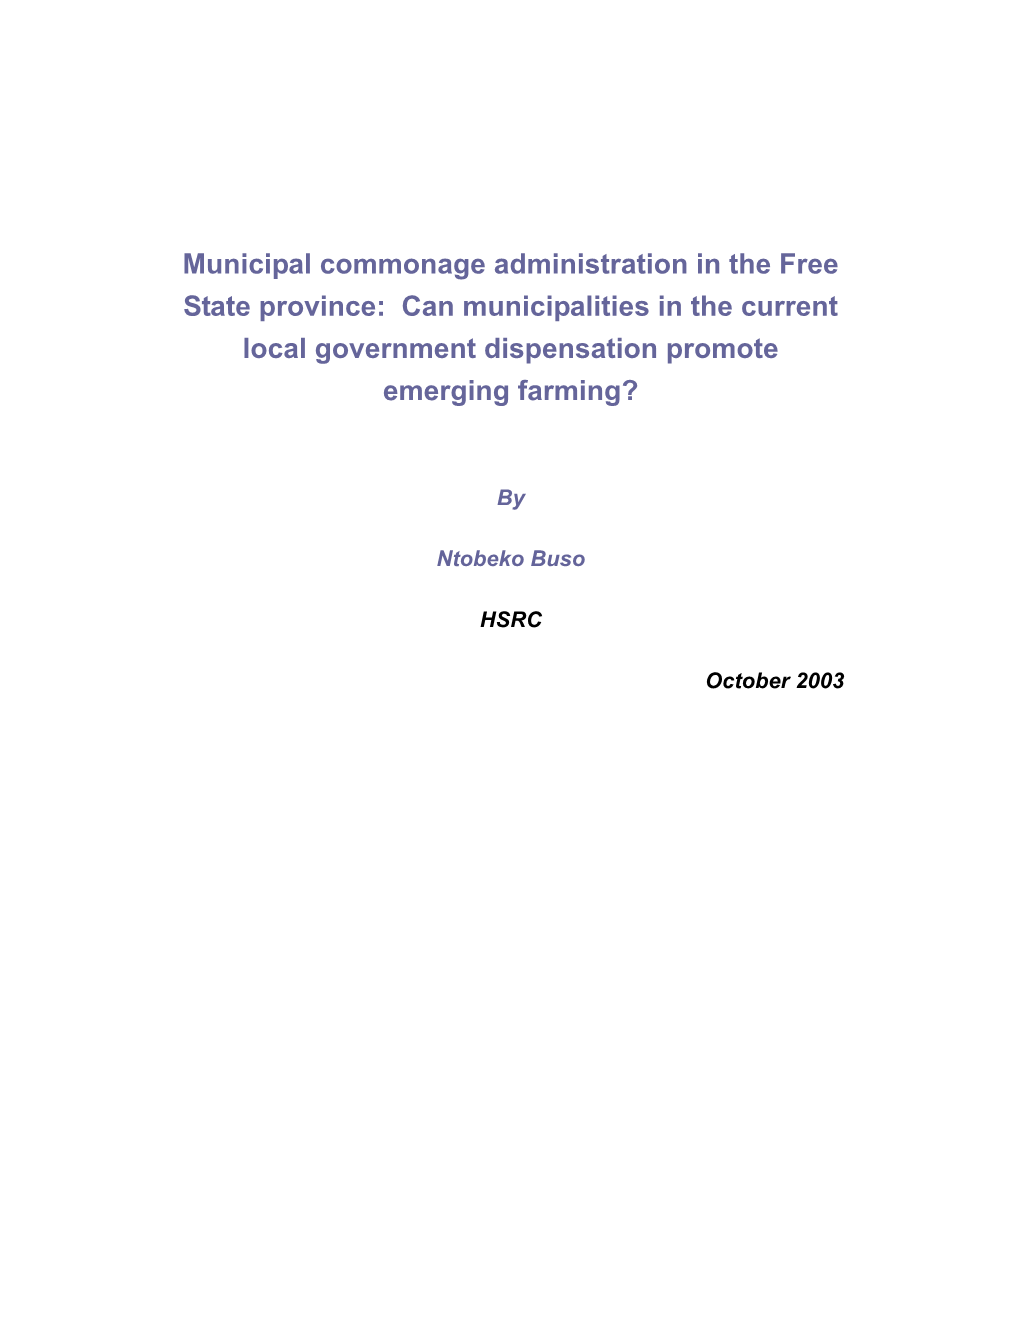 Municipal Commonage Administration in the Free State Province: Can Municipalities in the Current Local Government Dispensation Promote Emerging Farming?